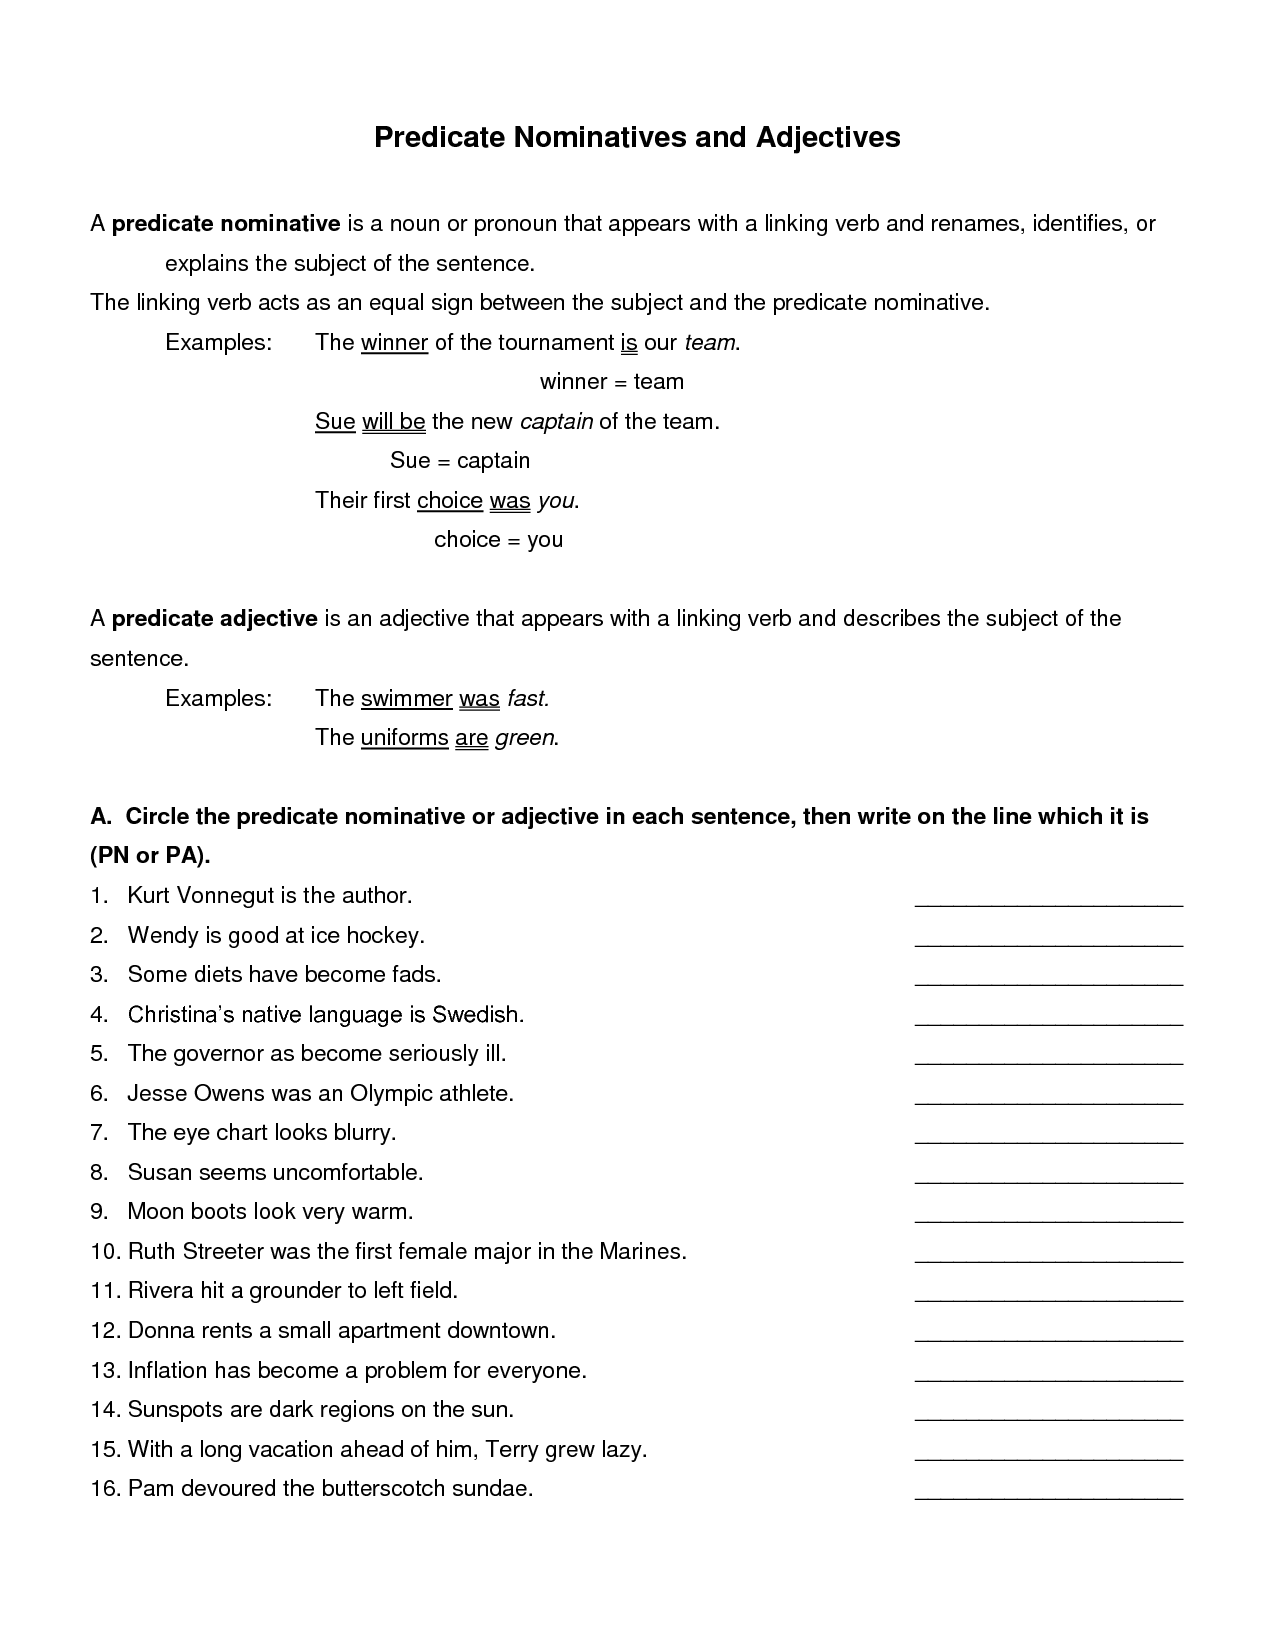 predicate-nominative-and-predicate-adjective-worksheet-with-answers-pdf-askworksheet